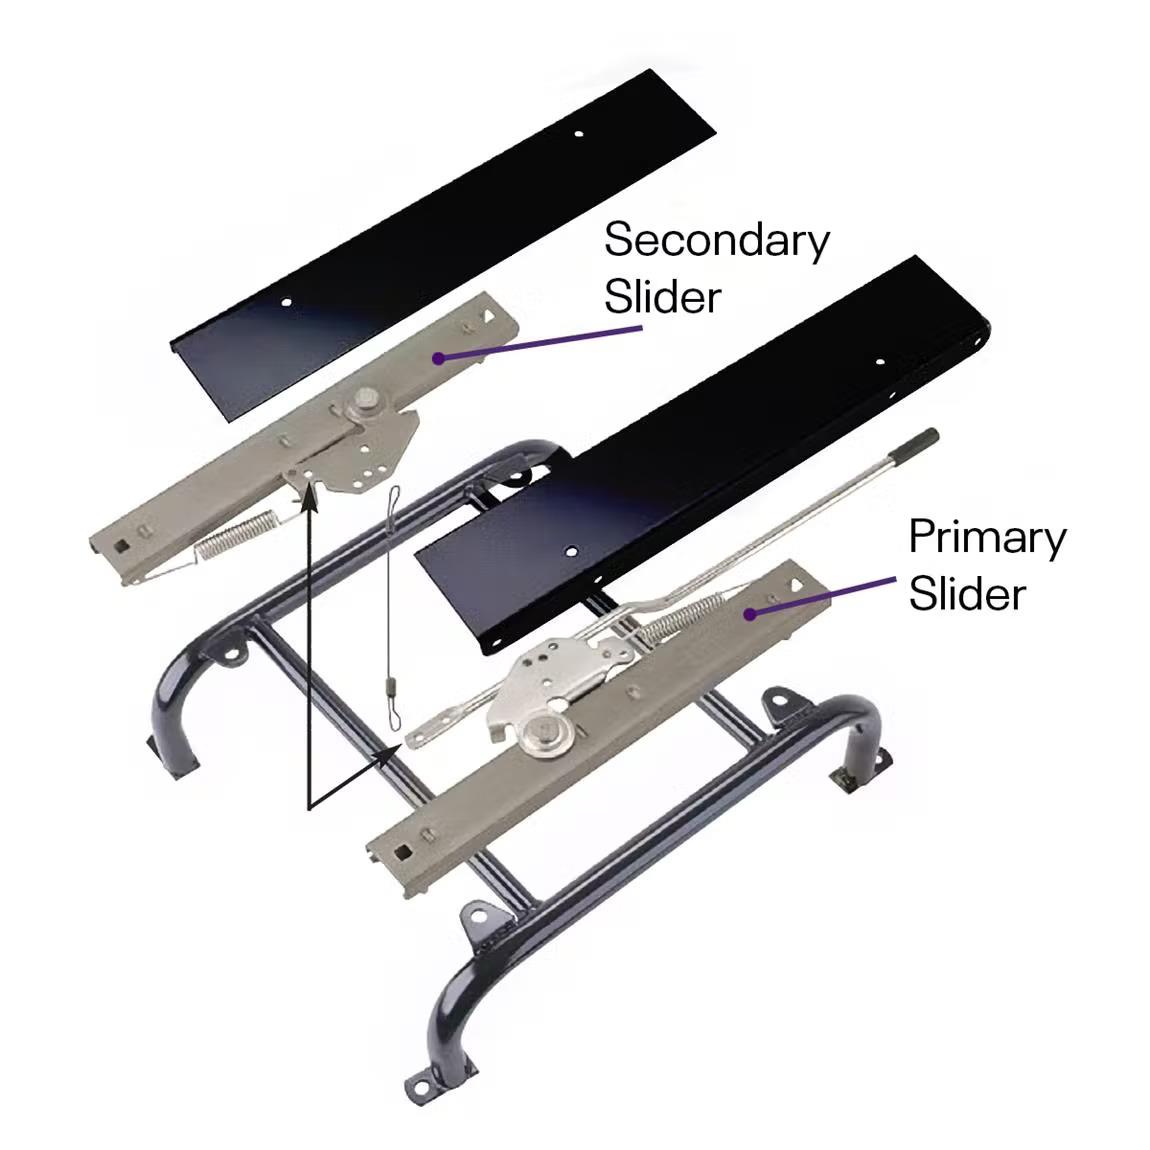 COM-5753 | COM-5753 Universal Seat Mounting Frame with Slider and Mounts Common Application15.jpg